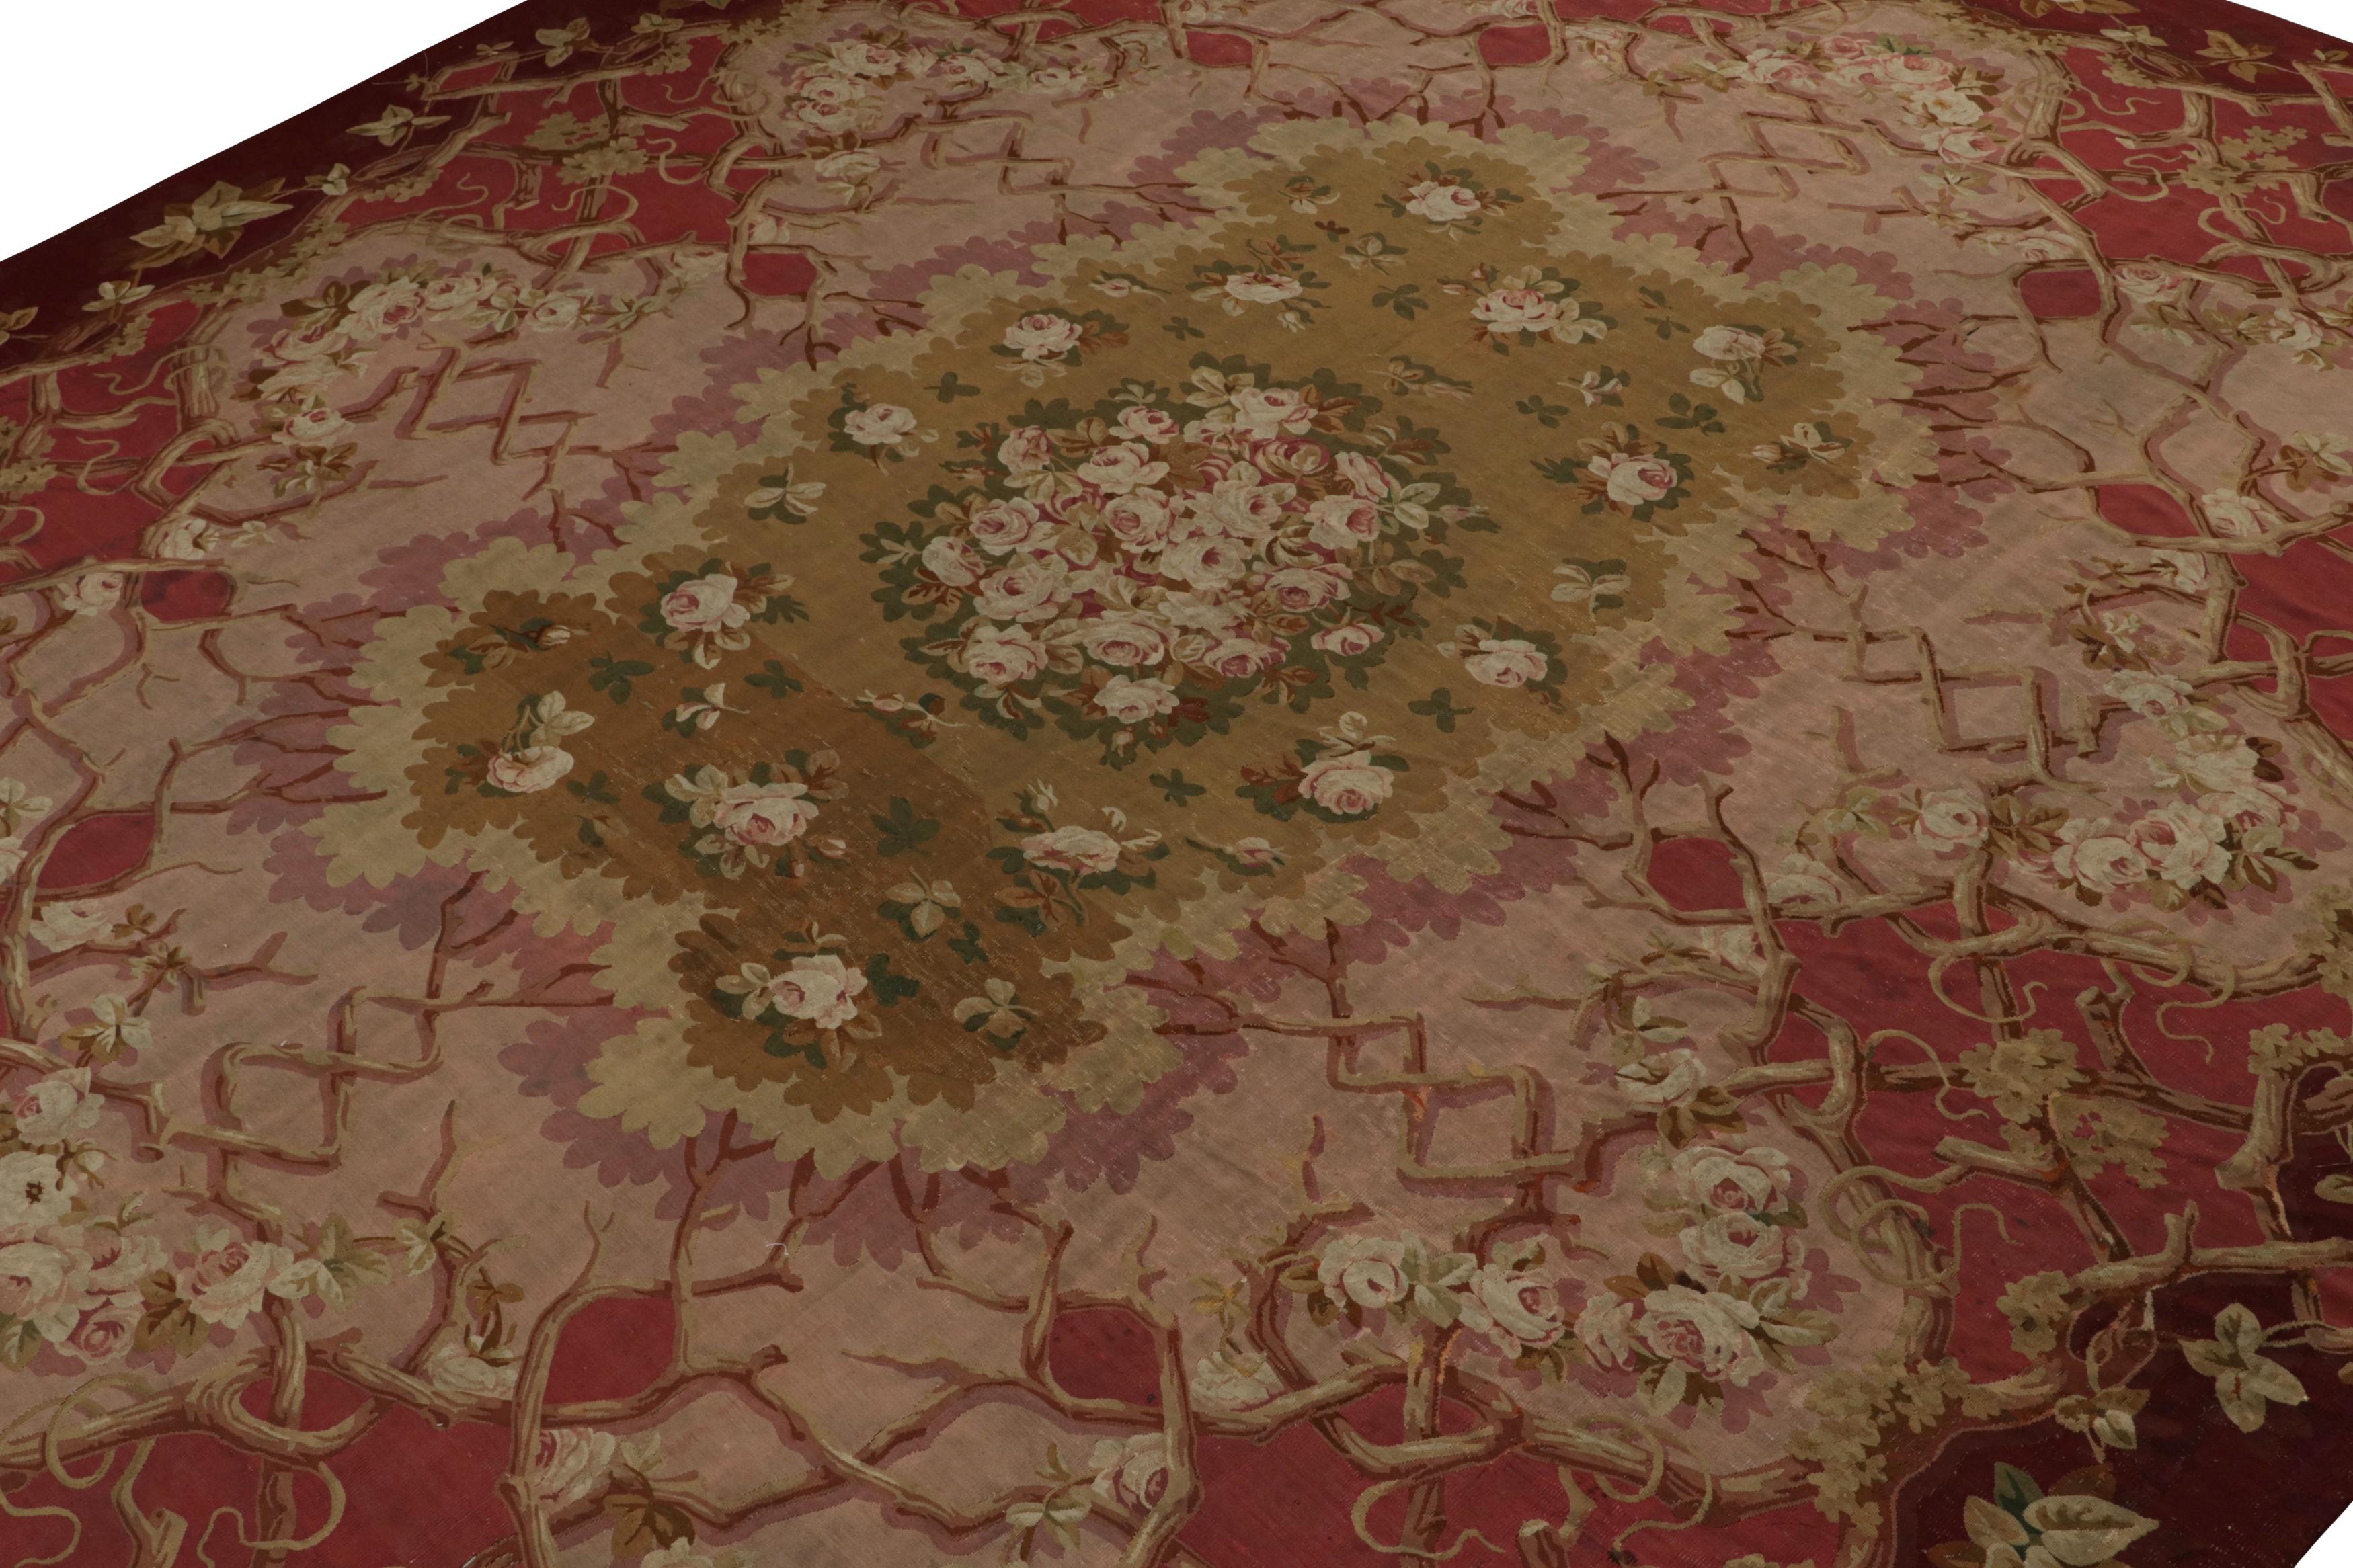 Hand-Woven Antique Aubusson Flatweave Rug in Red with Floral Patterns For Sale